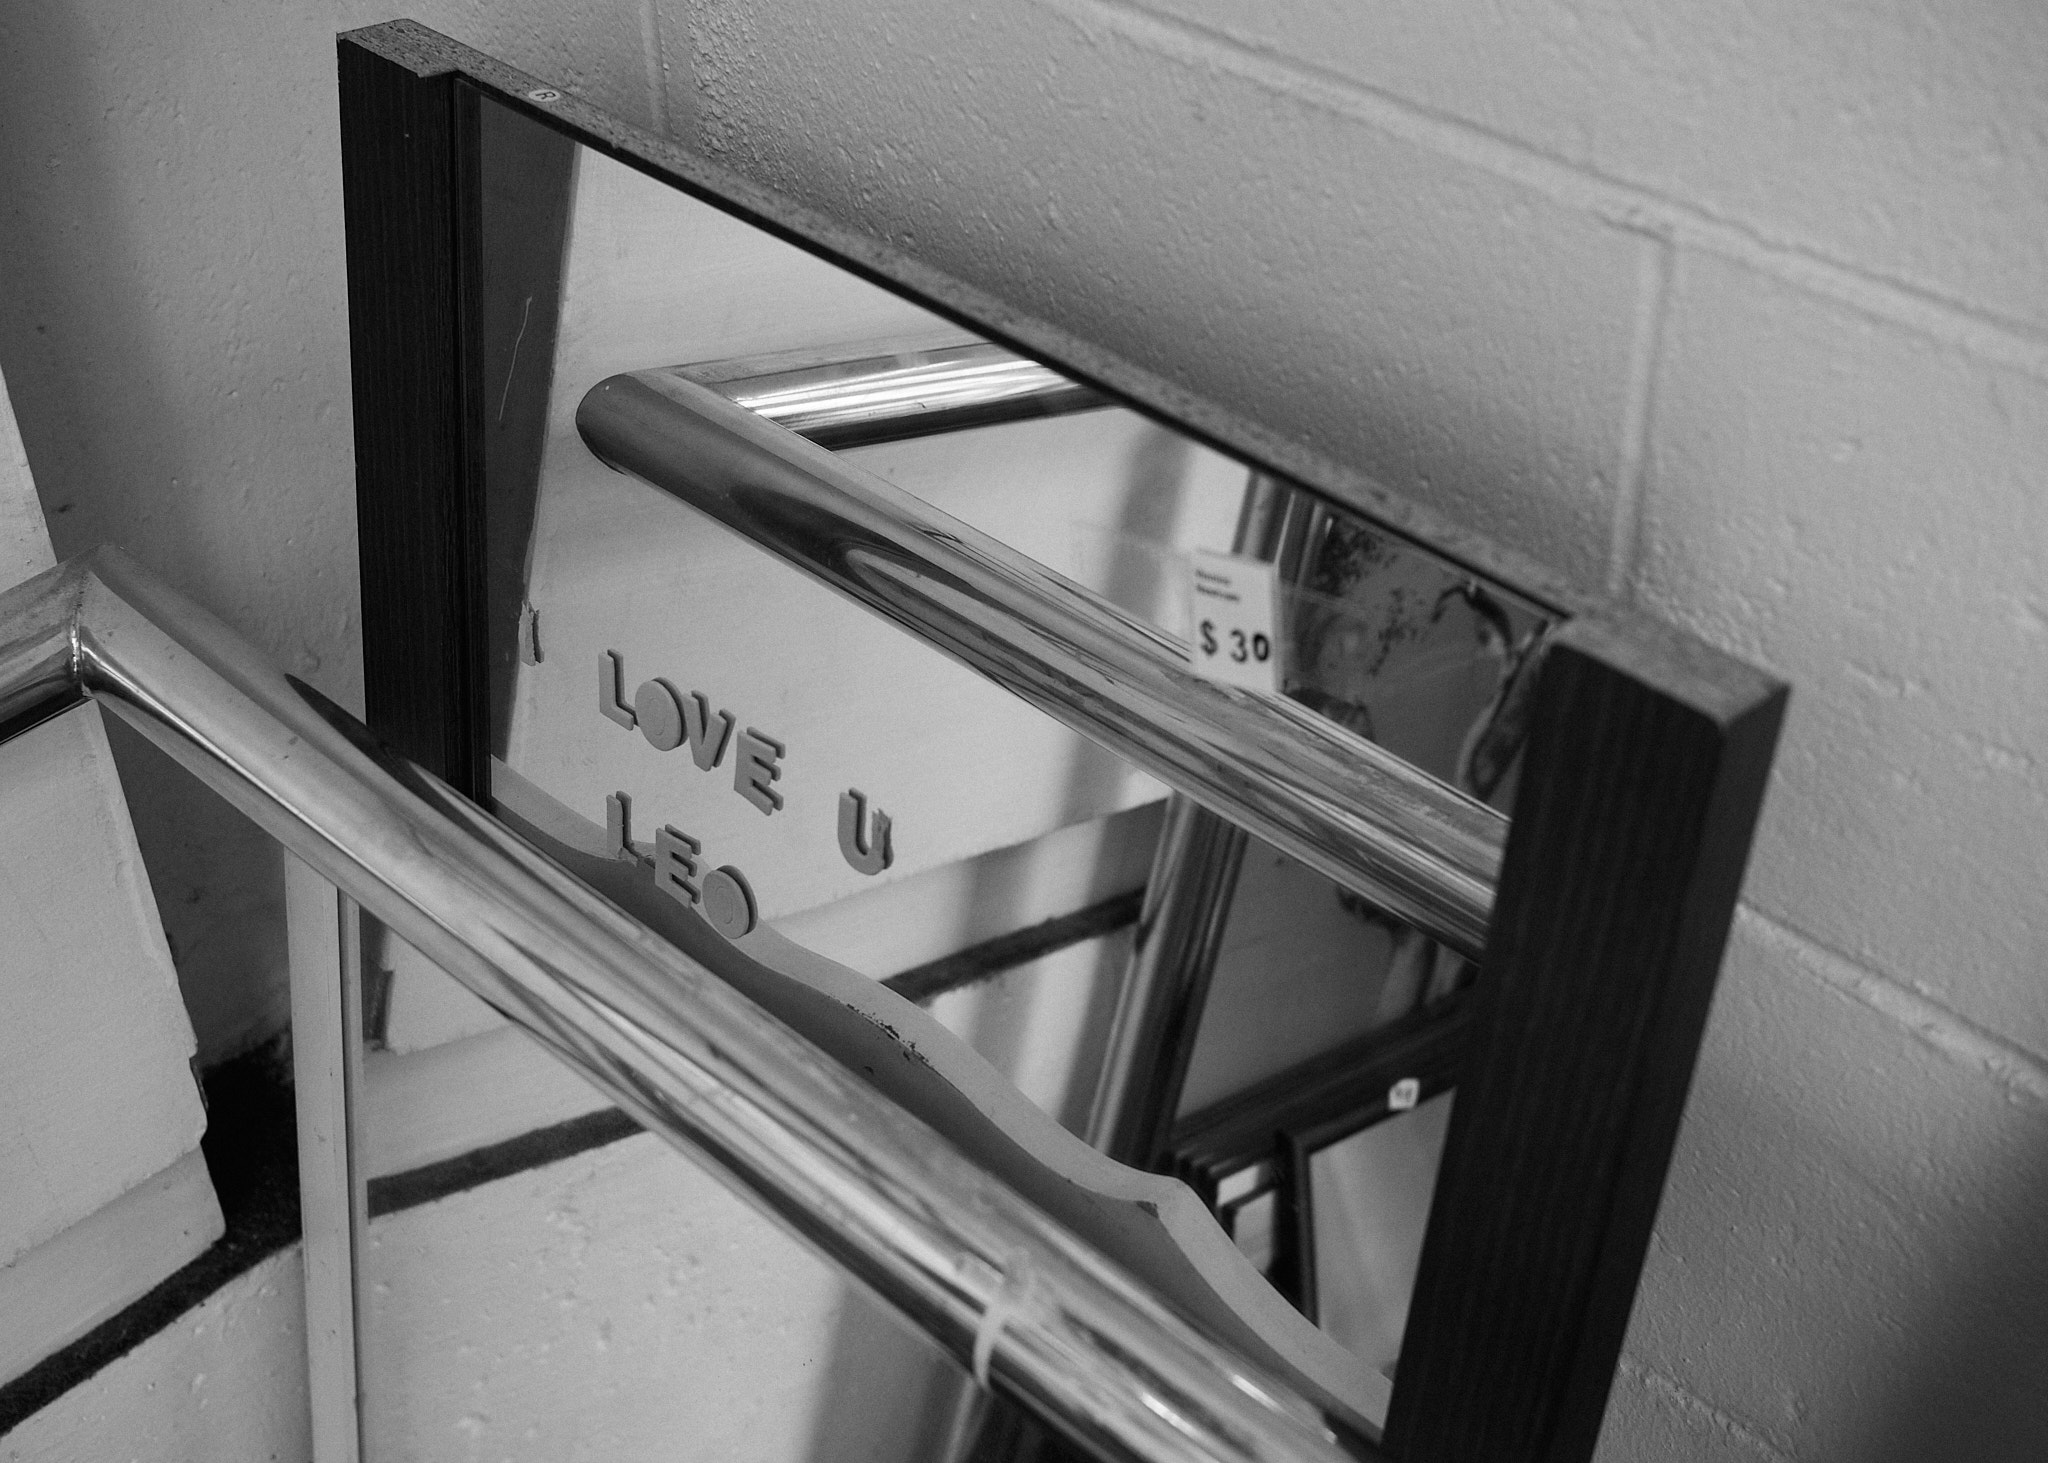 A mirror leans against the wall with the words 'I LOVE U LEO' stuck onto it with foam letters